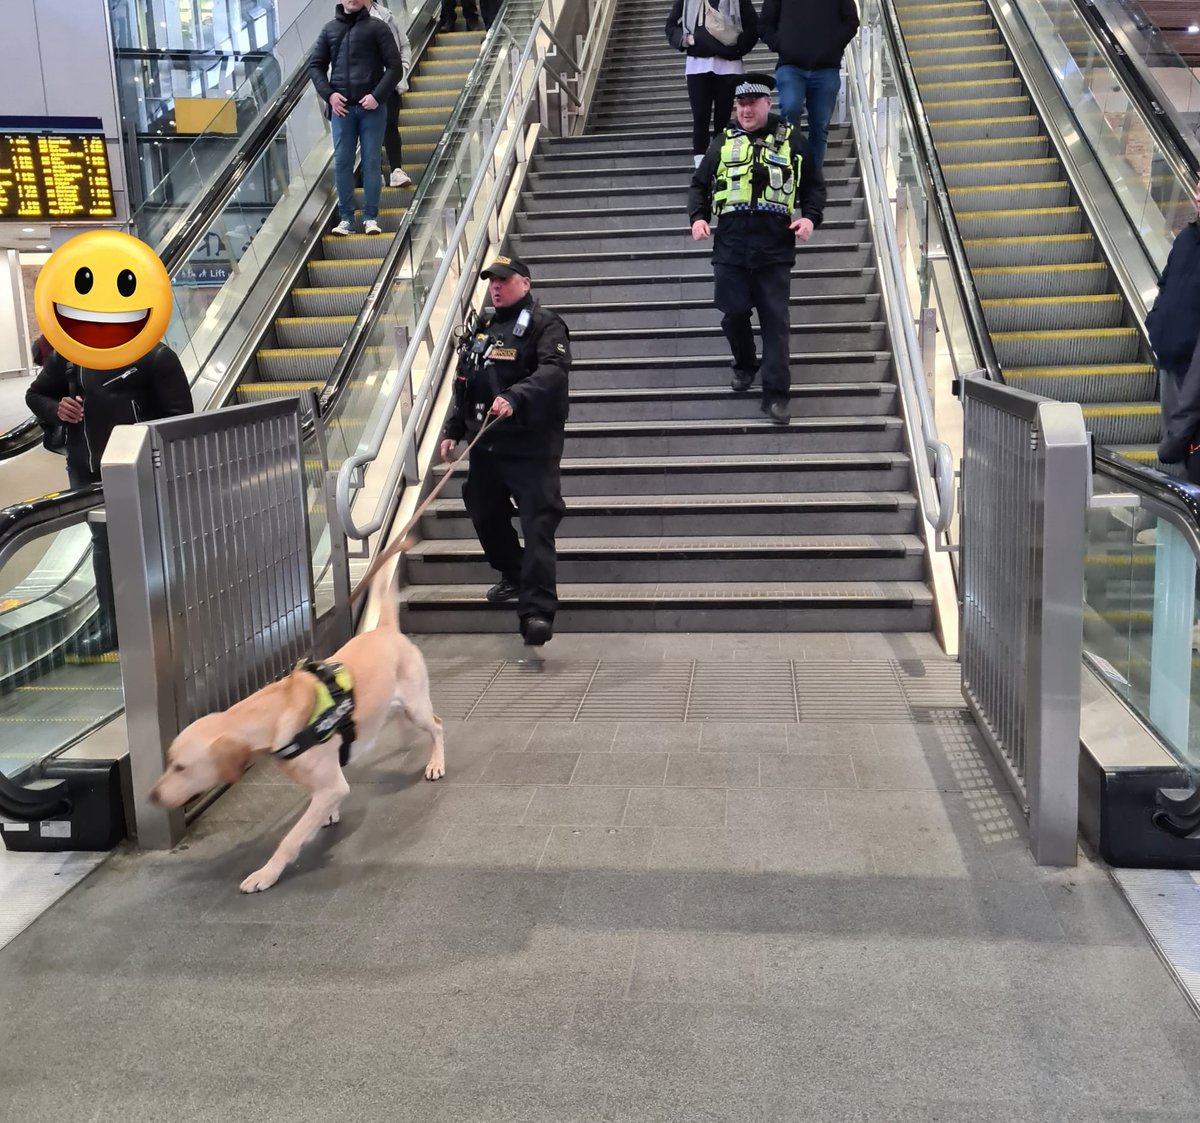 Today Police Dogs Polly & Mace from @BTPDogs & PD Elvis from @CityPoliceDogs joined us at @NetworkRailLBG Officers were looking to detect drug/weapon offences. They removed a knife from the street with help from @metpoliceuk @BTPOSU + arrested wanted persons and staff assaults.